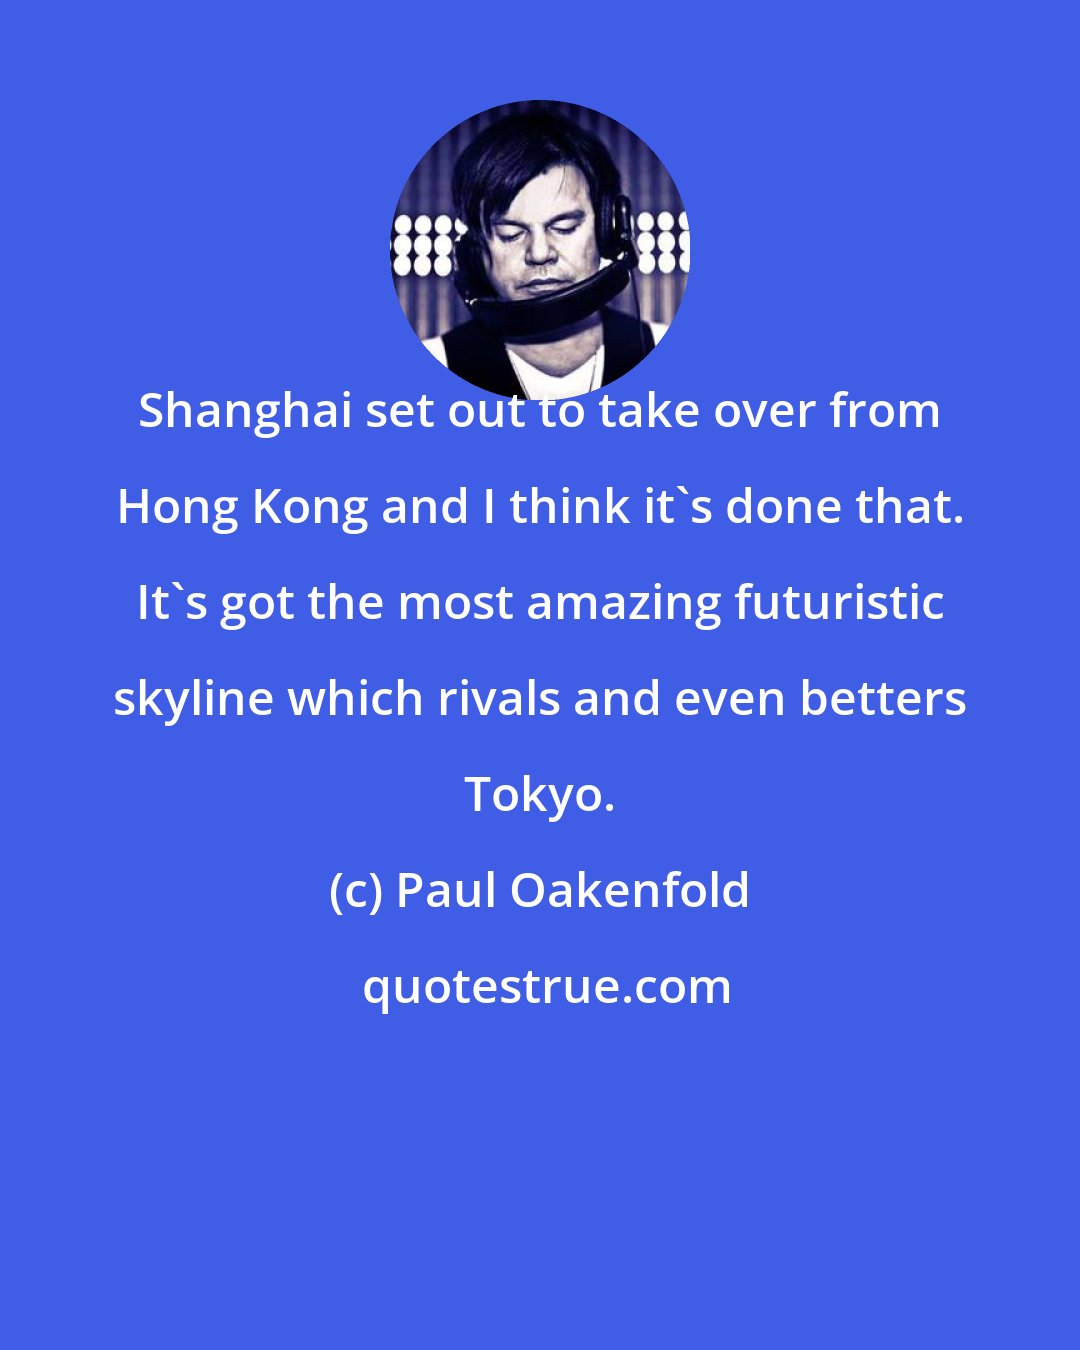 Paul Oakenfold: Shanghai set out to take over from Hong Kong and I think it's done that. It's got the most amazing futuristic skyline which rivals and even betters Tokyo.